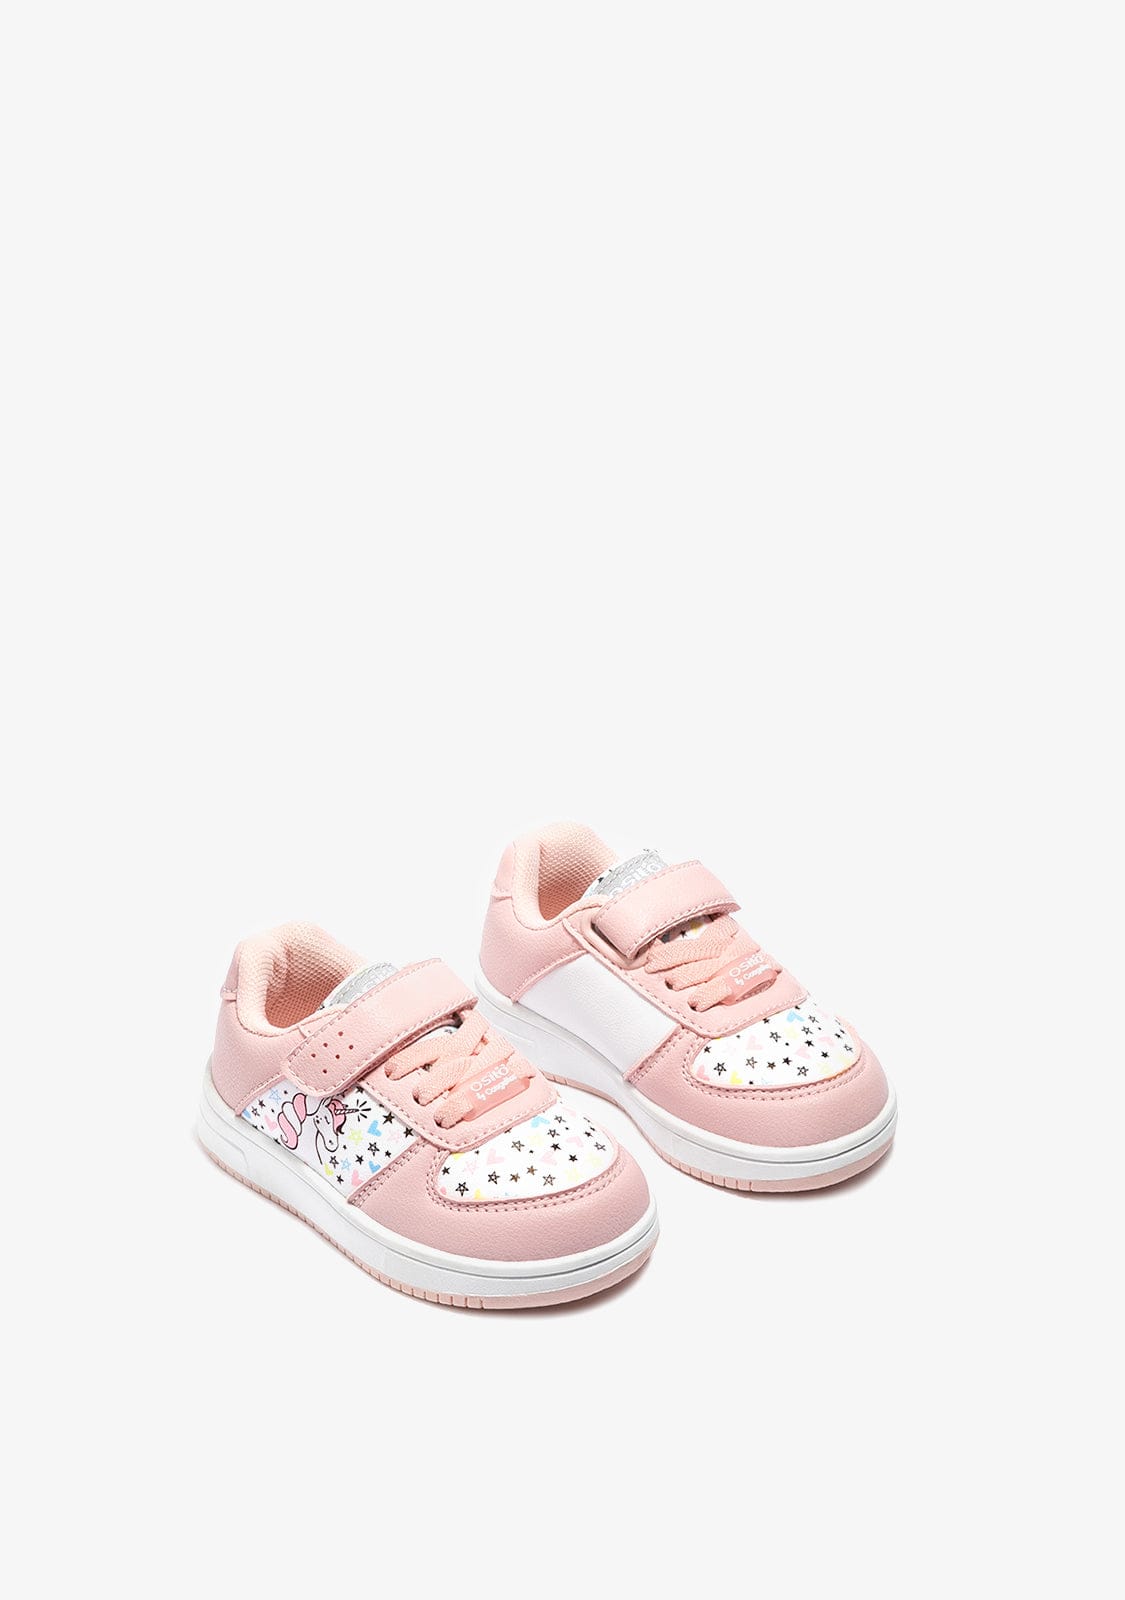 OSITO Shoes Baby's Pink Unicorn Sneakers Napa